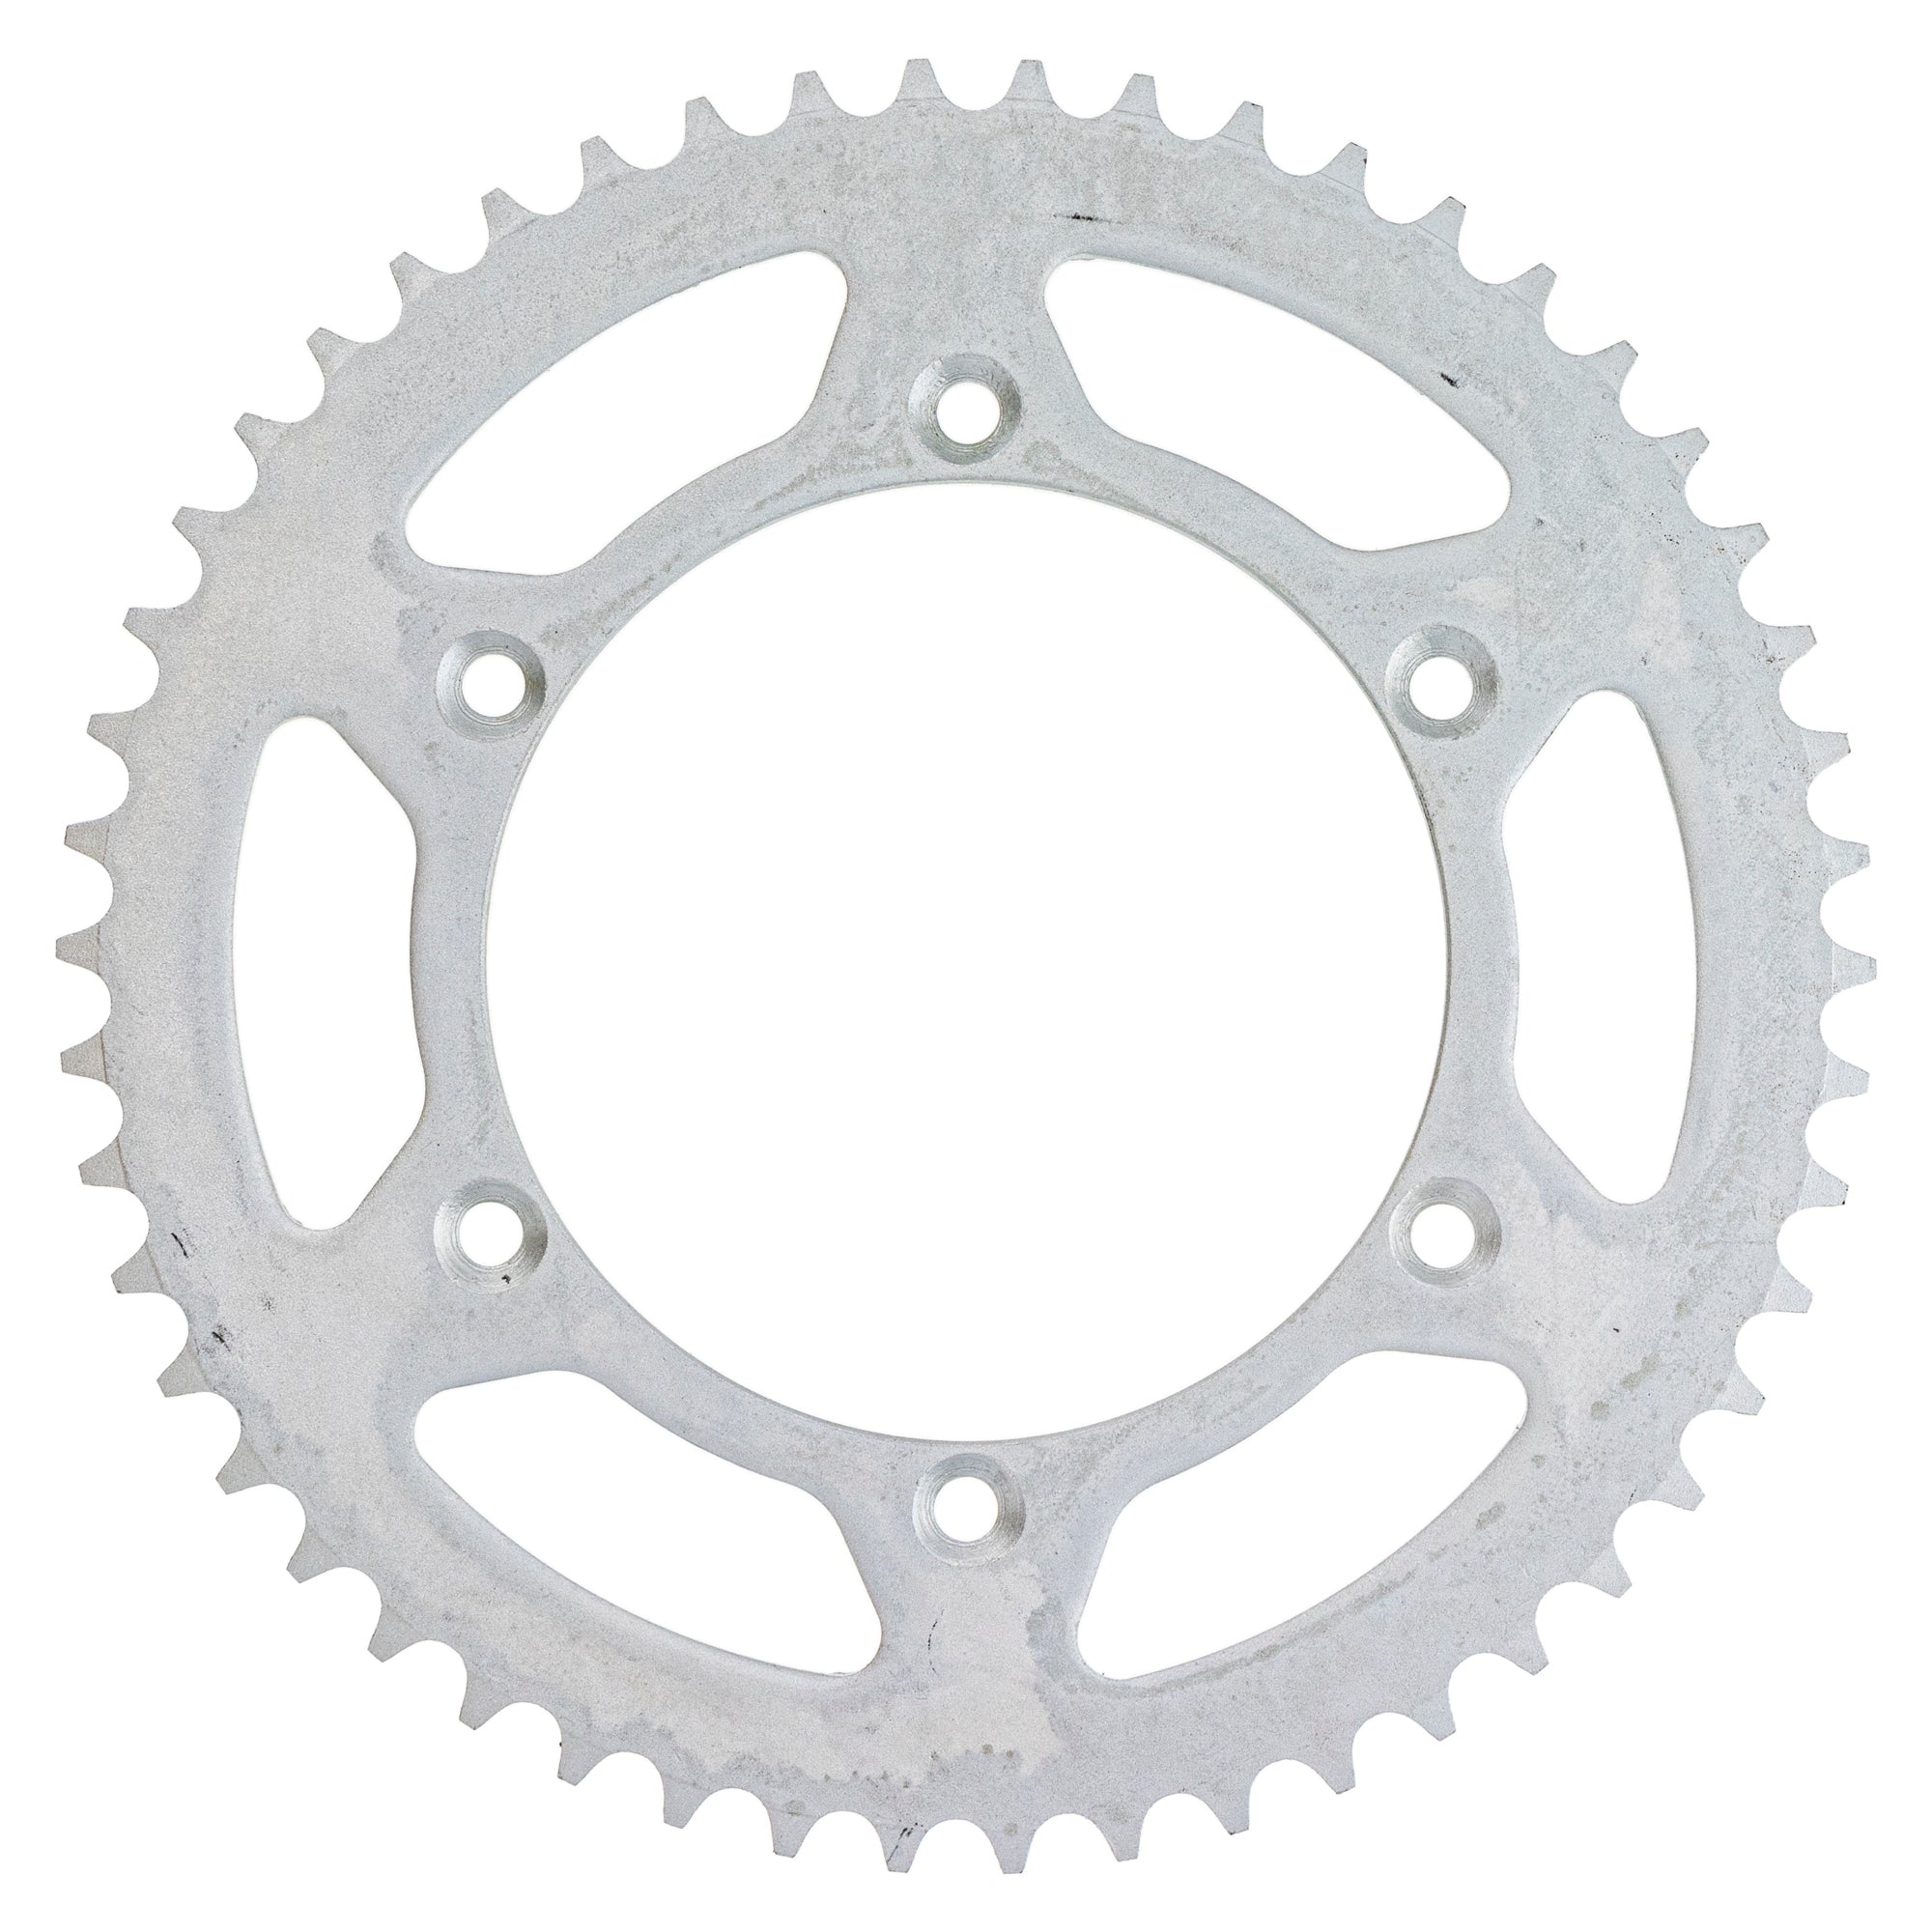 Drive Sprockets & Chain Kit For BETA MK1004121